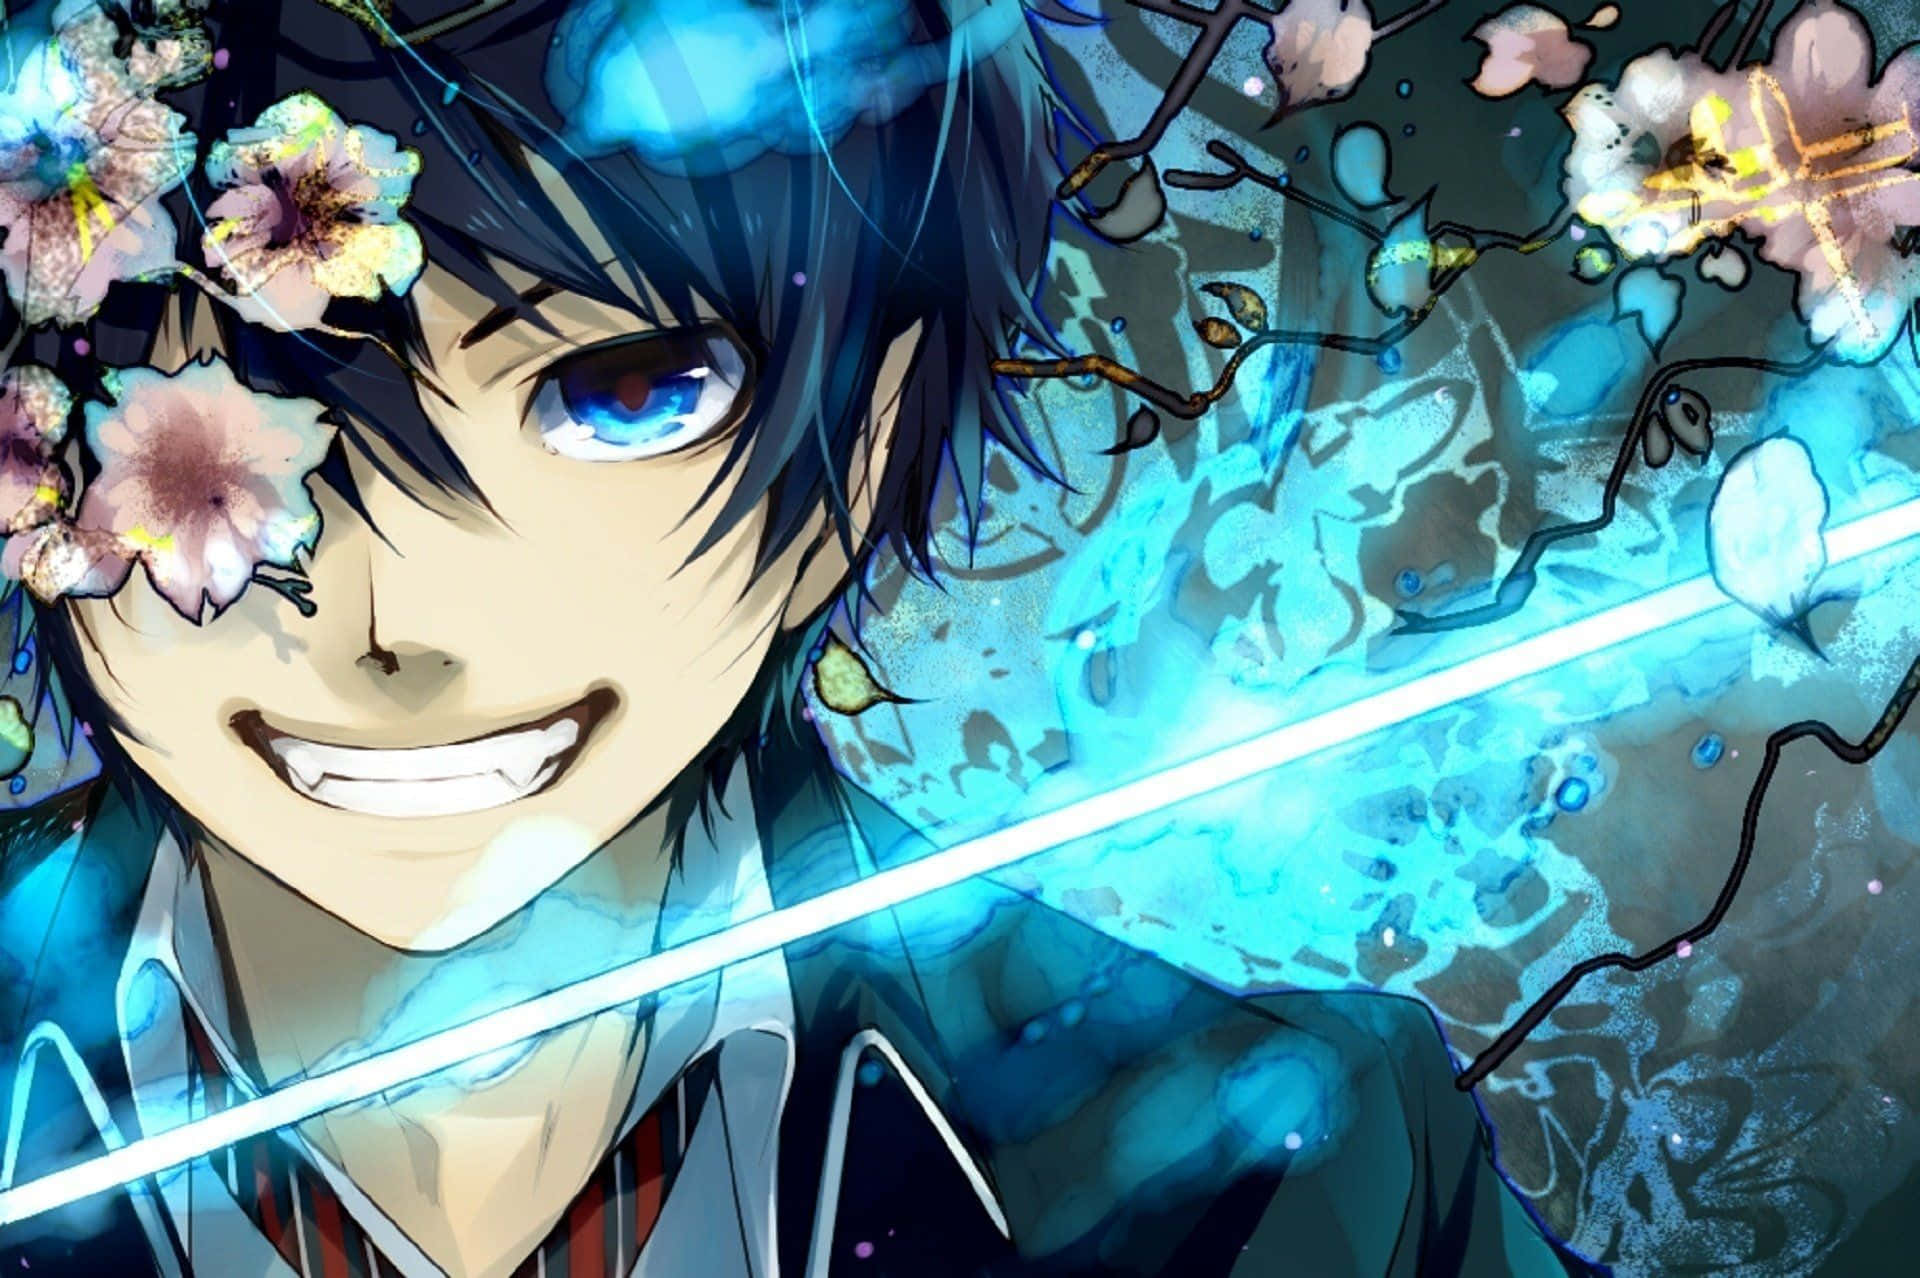 Discover the powerful world of Blue Exorcist